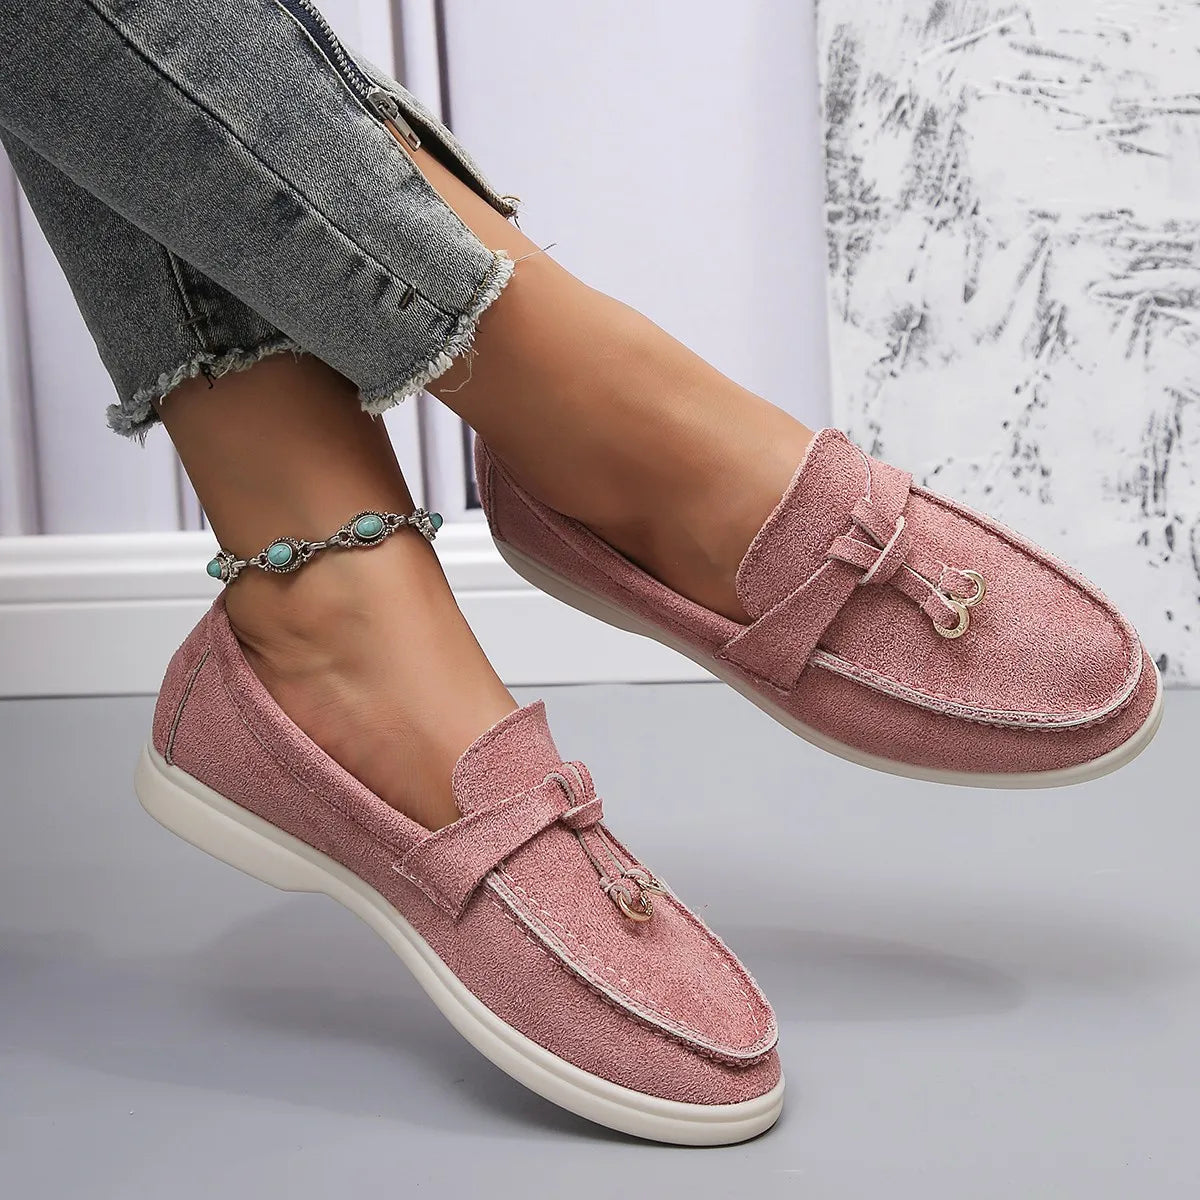 New Women Loafers Slip on Ladies Flats Shoes Brand Spring Autumn Casual Flat Shoes Leather Cashmere Single Shoes Plus Siz 36